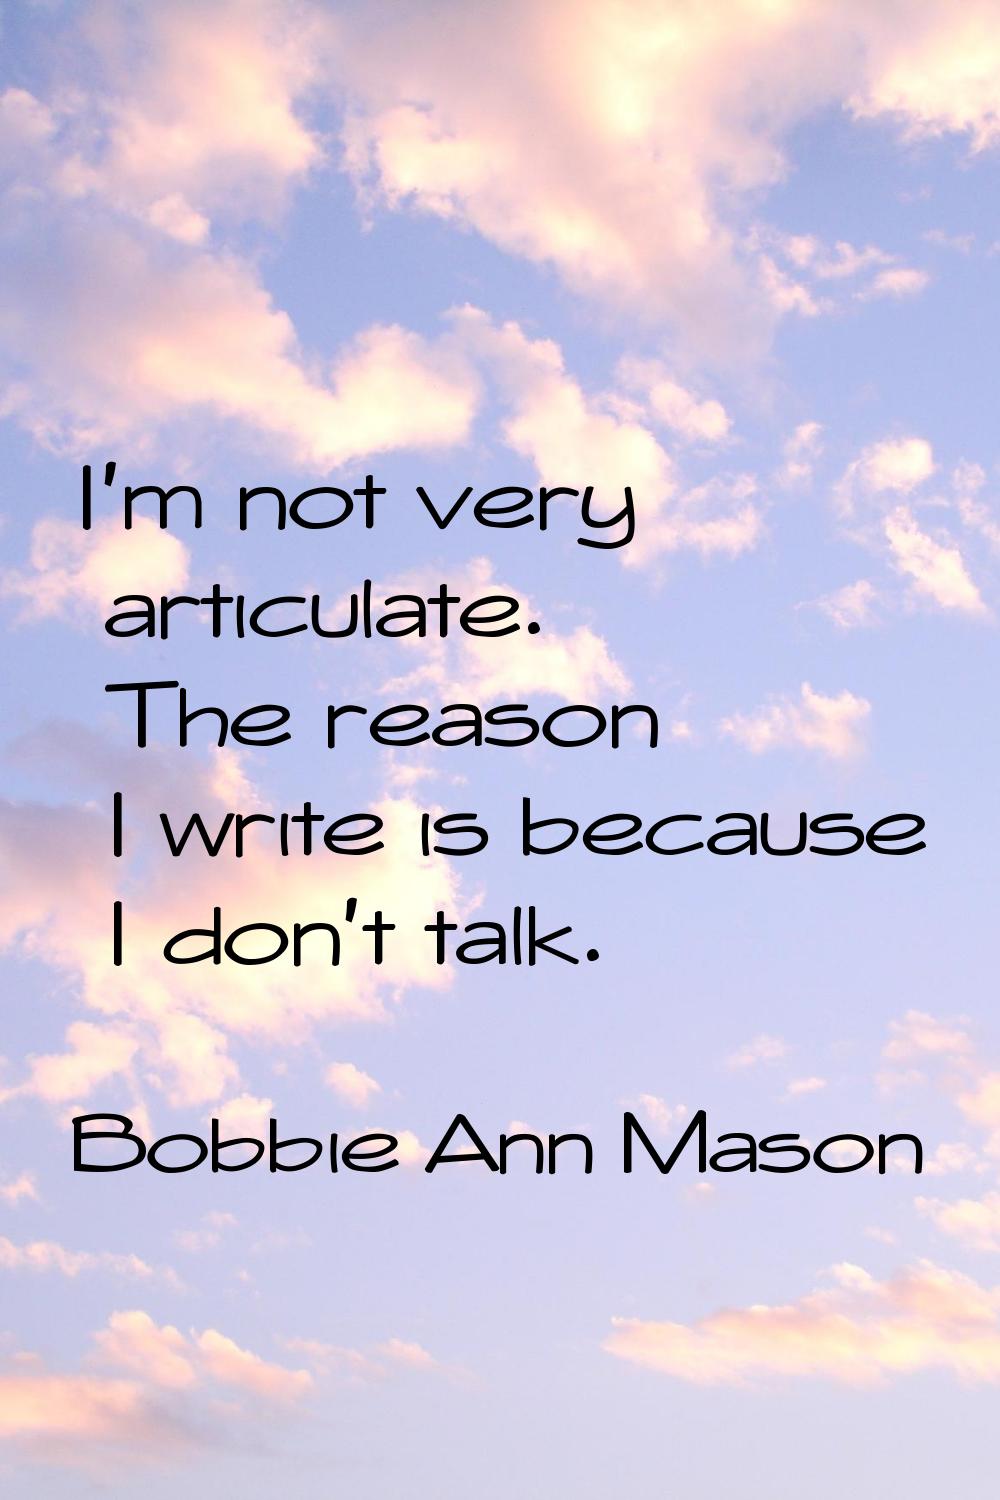 I'm not very articulate. The reason I write is because I don't talk.